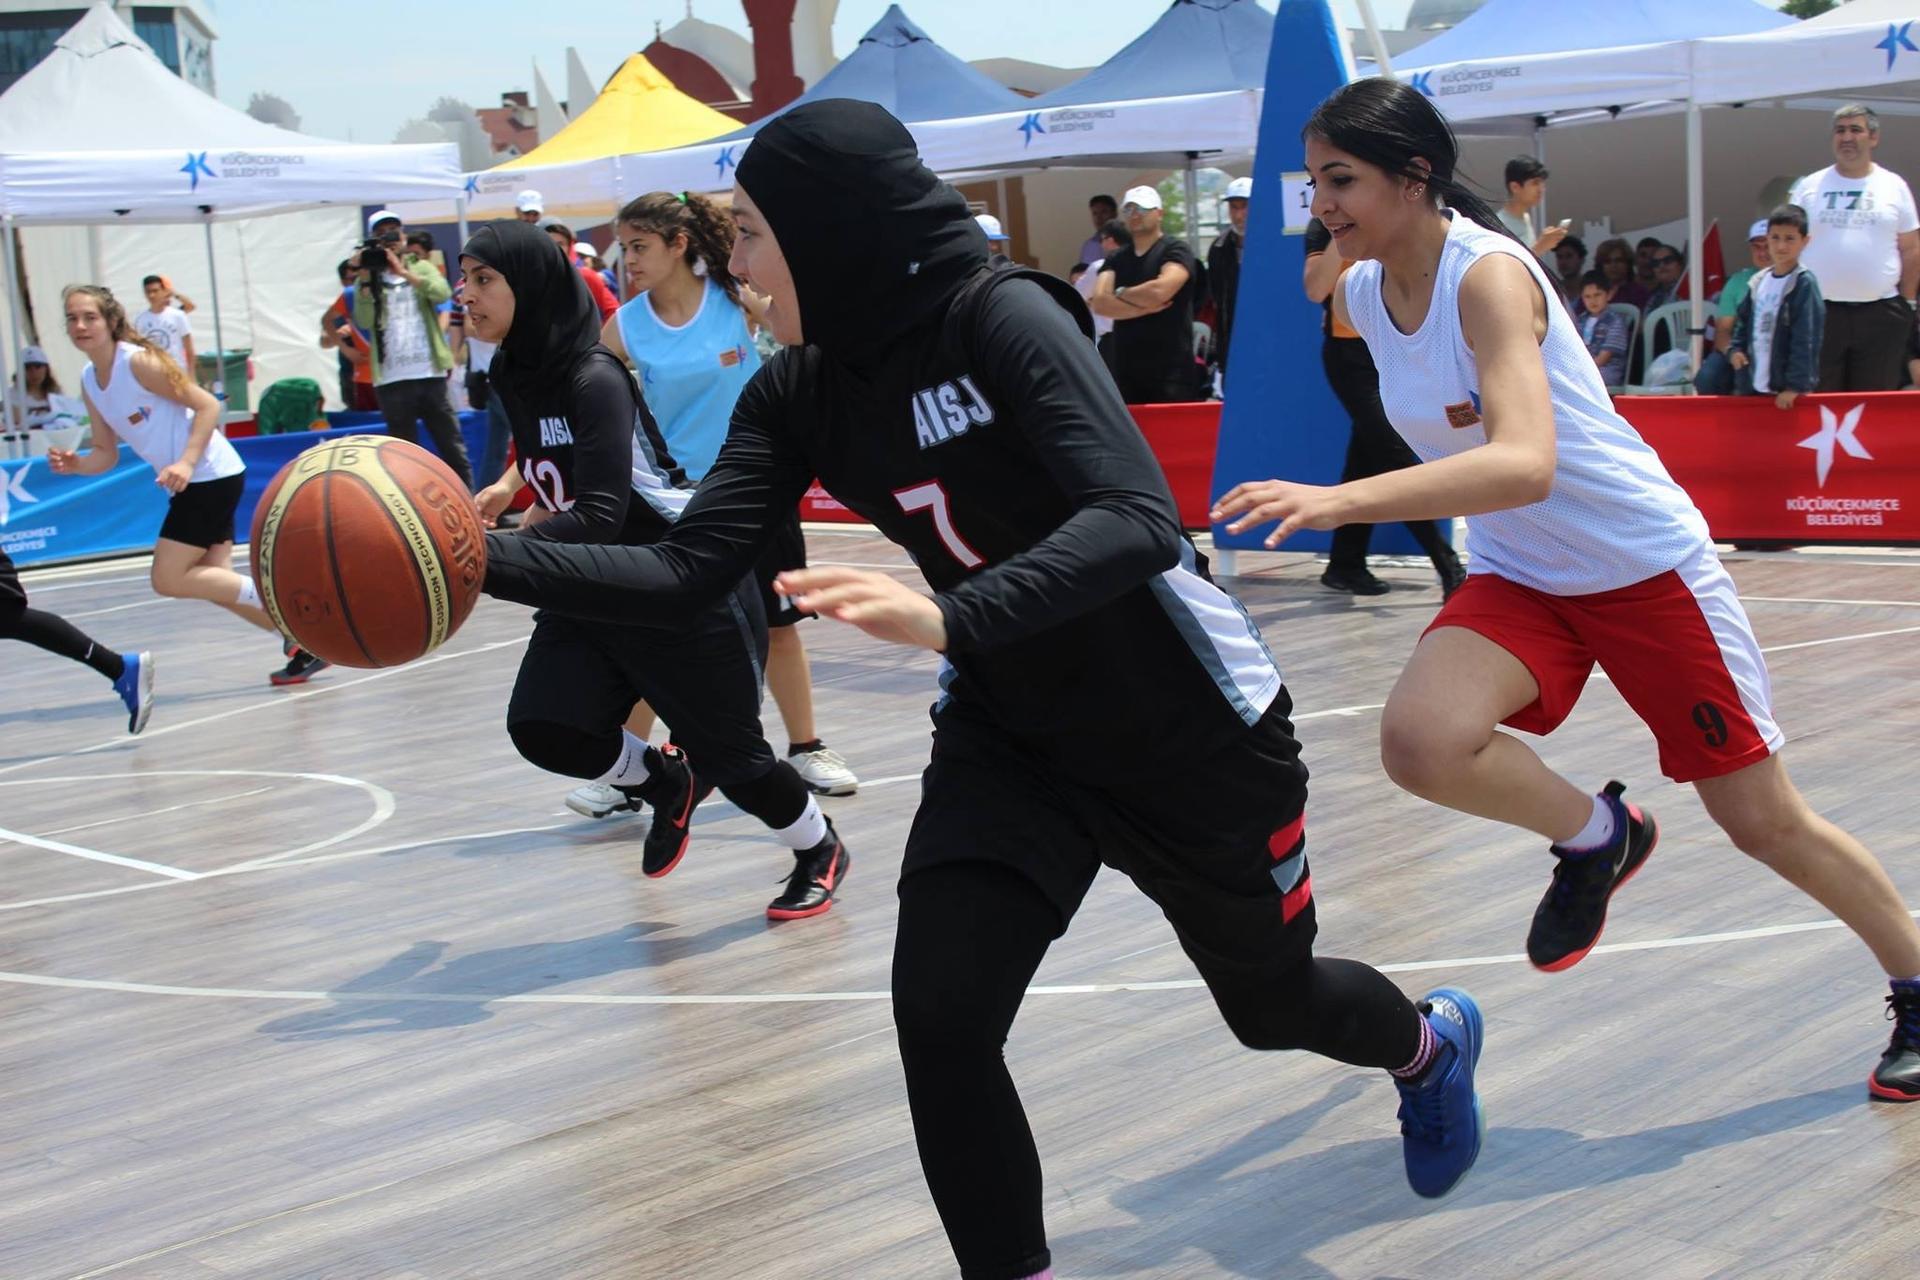 Professional basketball player Indira Kaljo has spent the past two years campaigning to permanently lift FIBA's head covering rule.